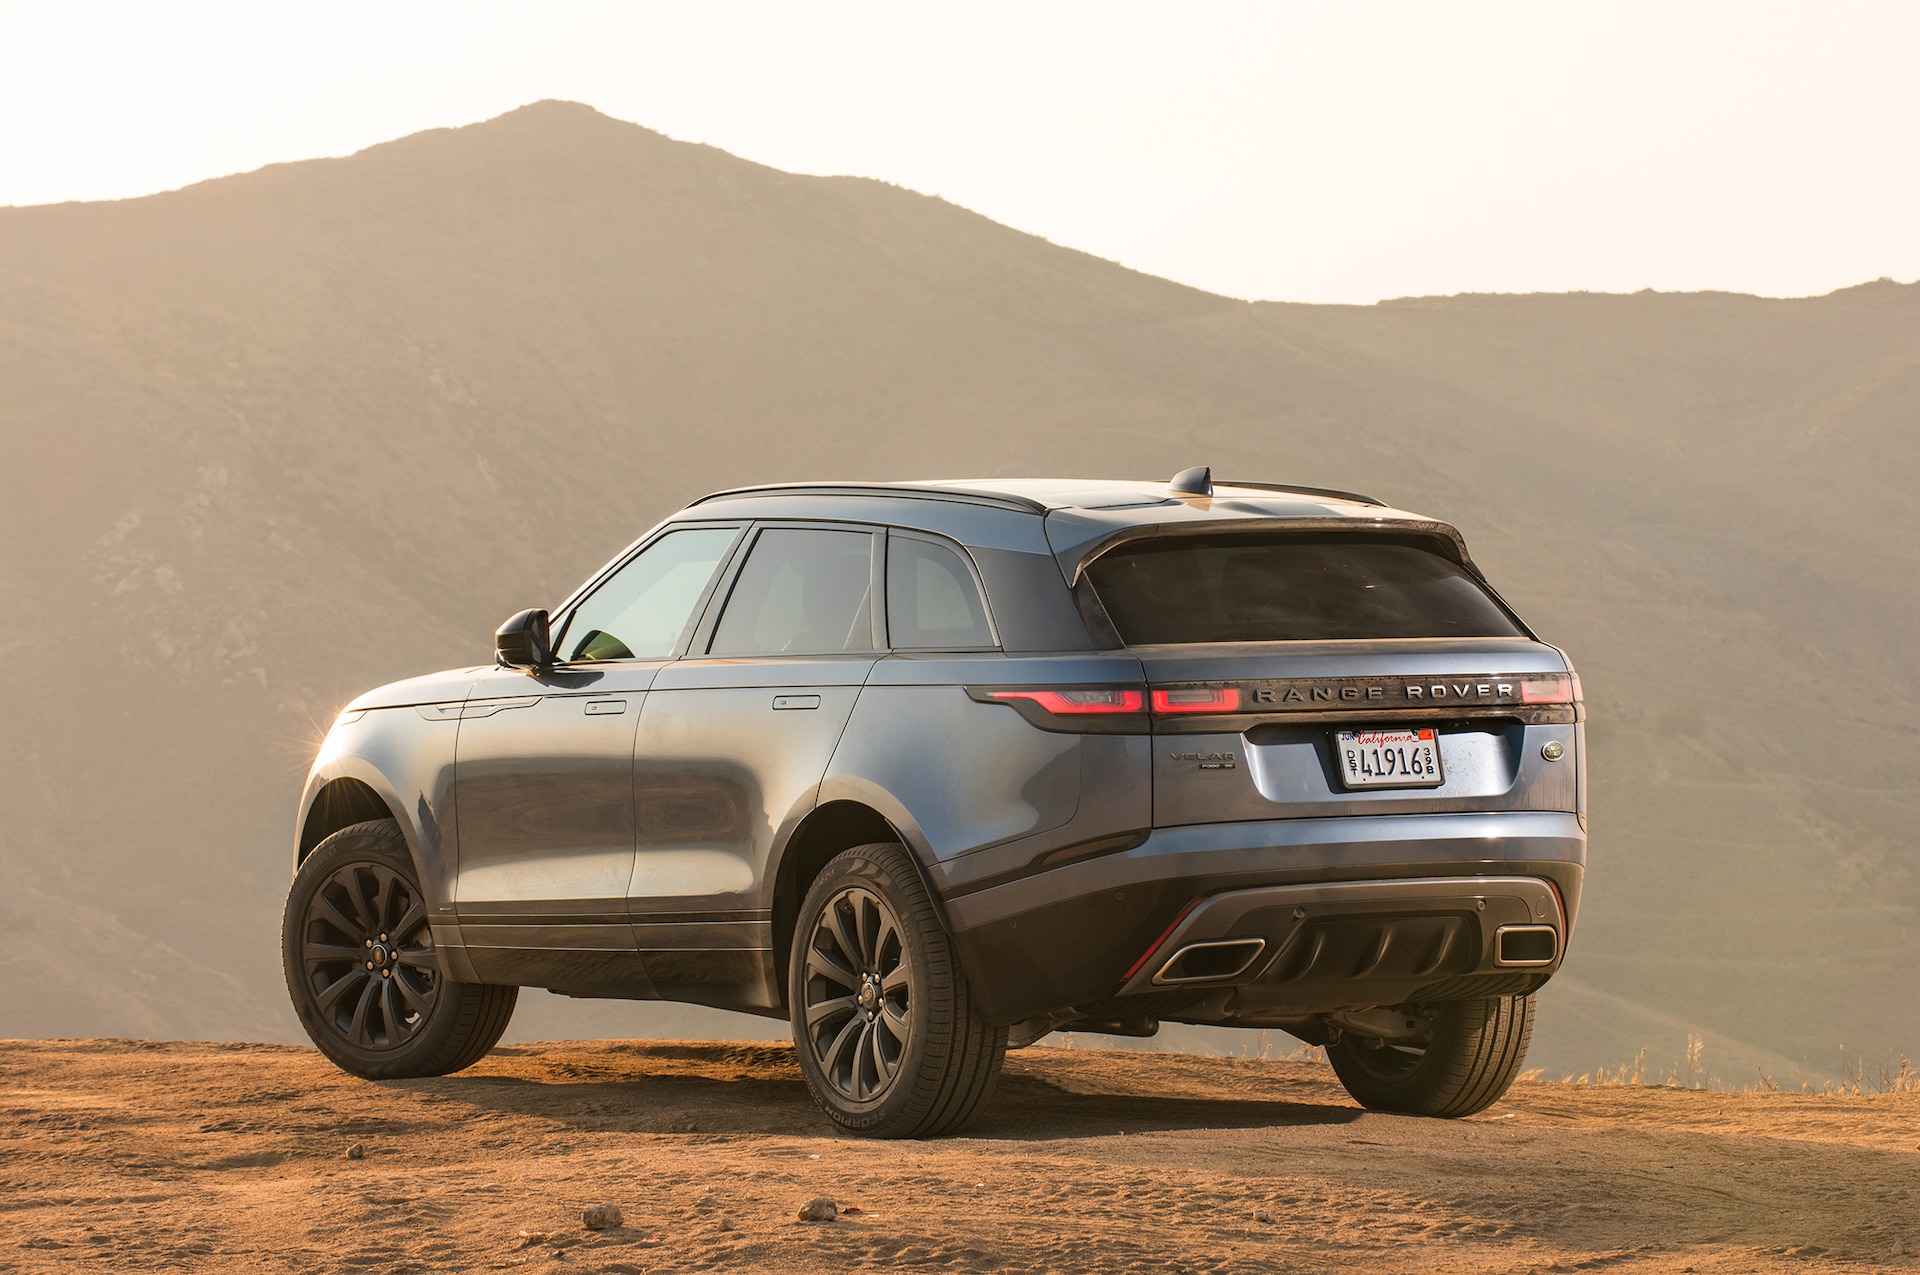 Range Rover Velar: 7 Things to Know Before You Buy